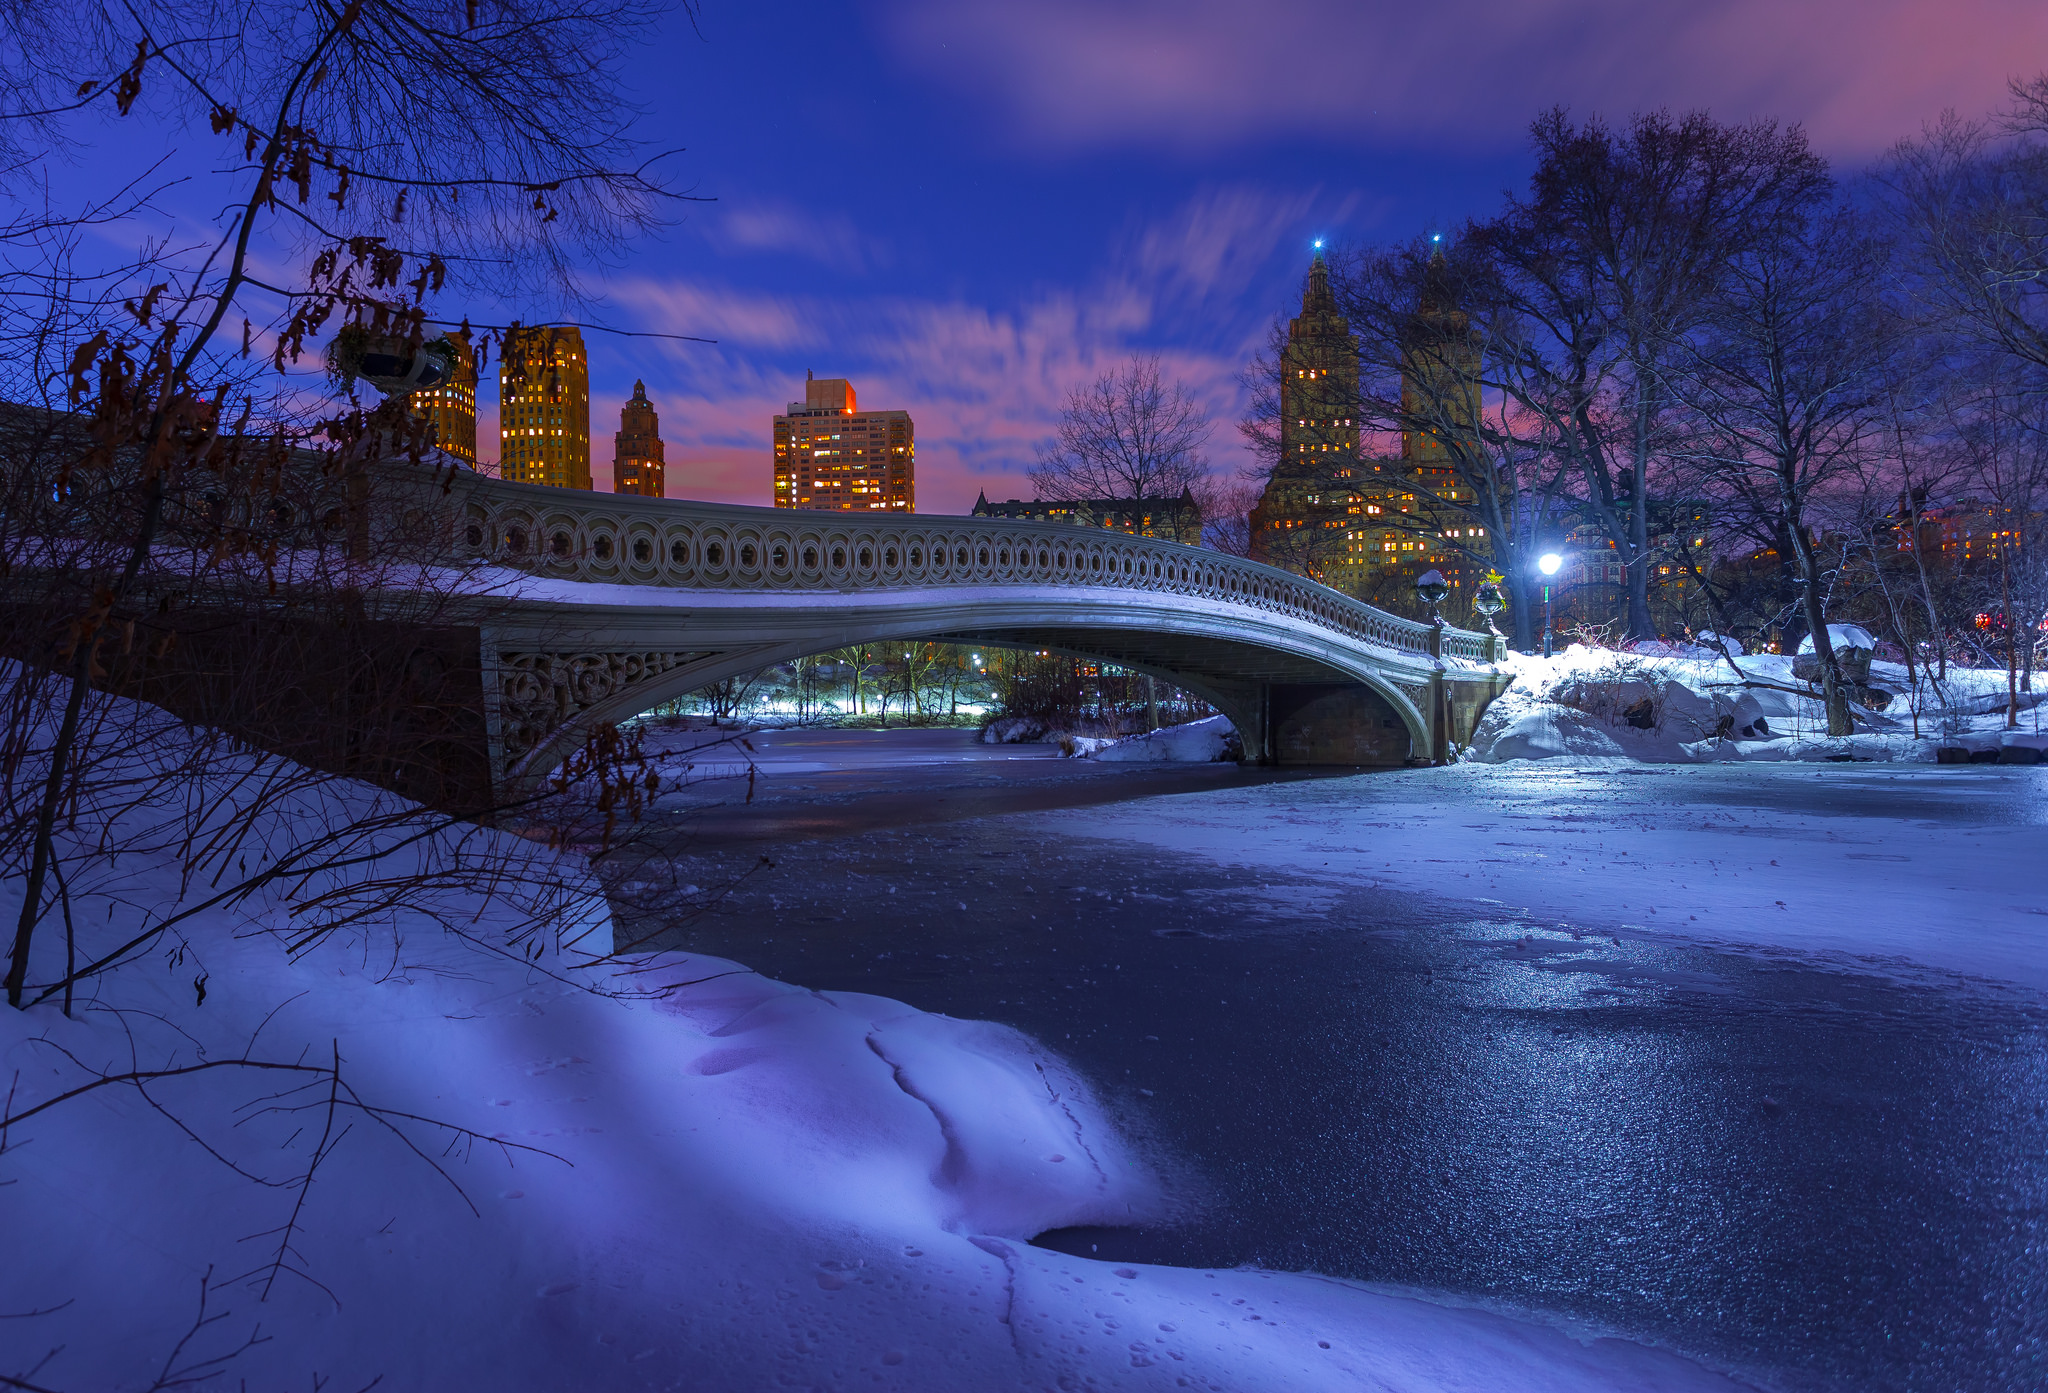 Central Park In The Snow At Night Wallpaper